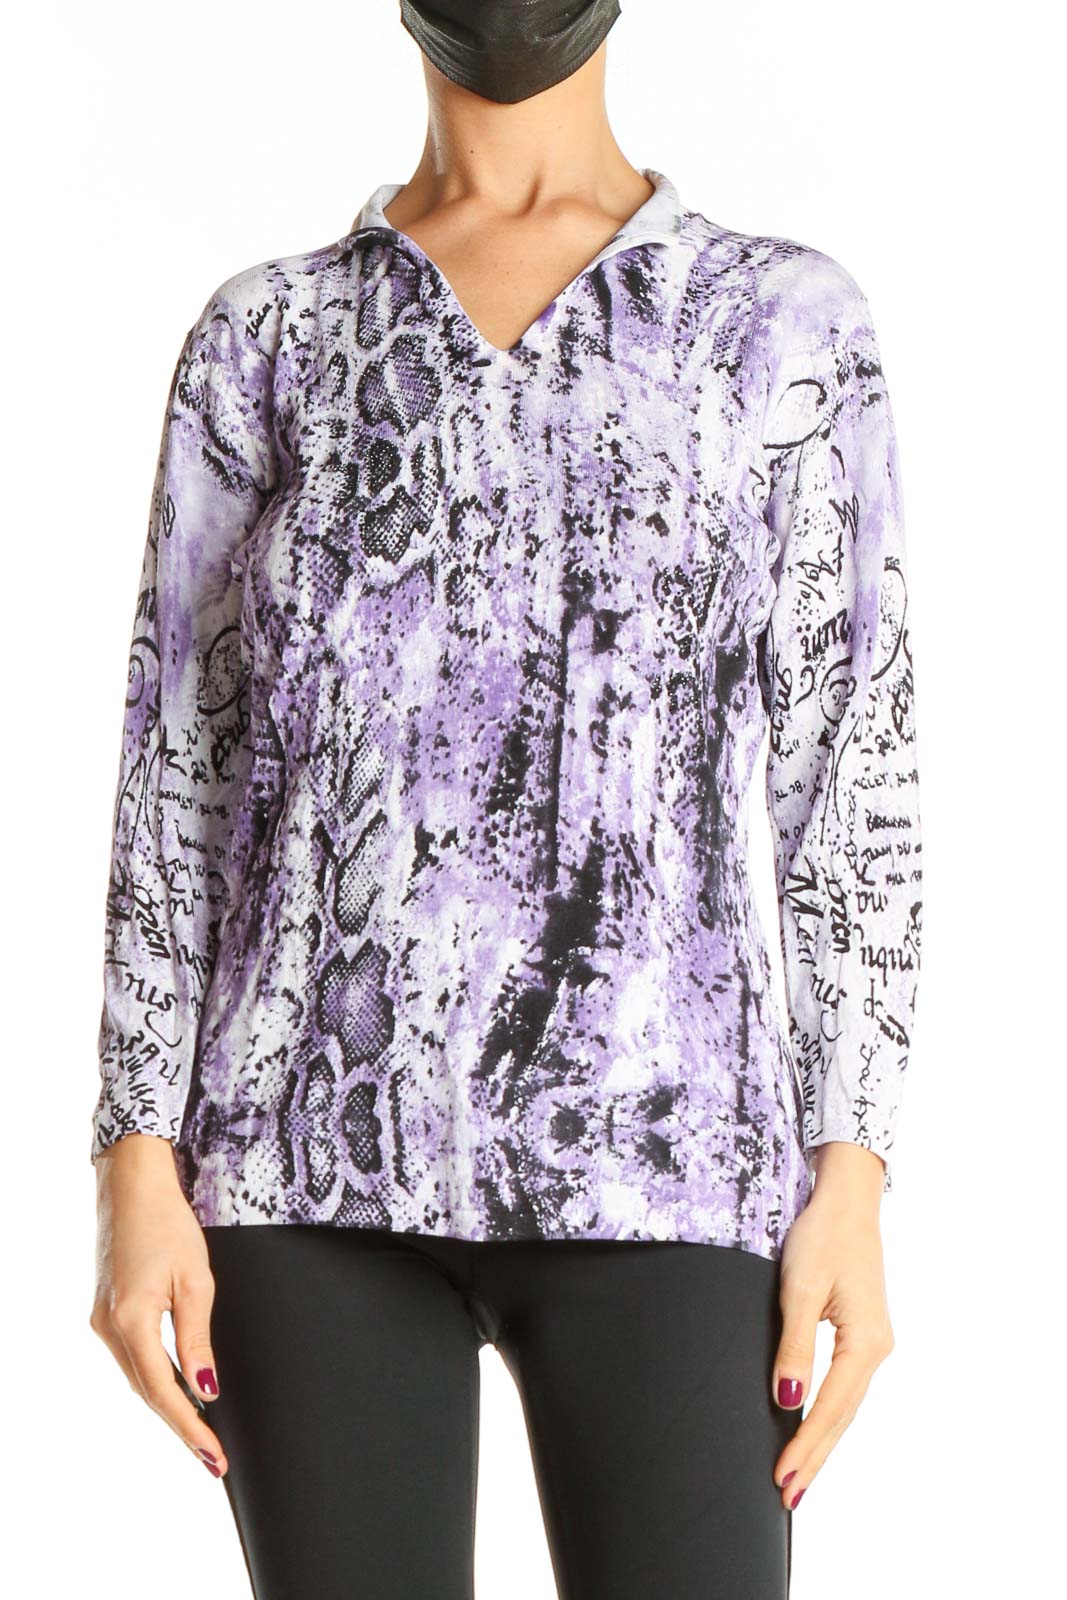 Purple Animal Print Casual Top Front